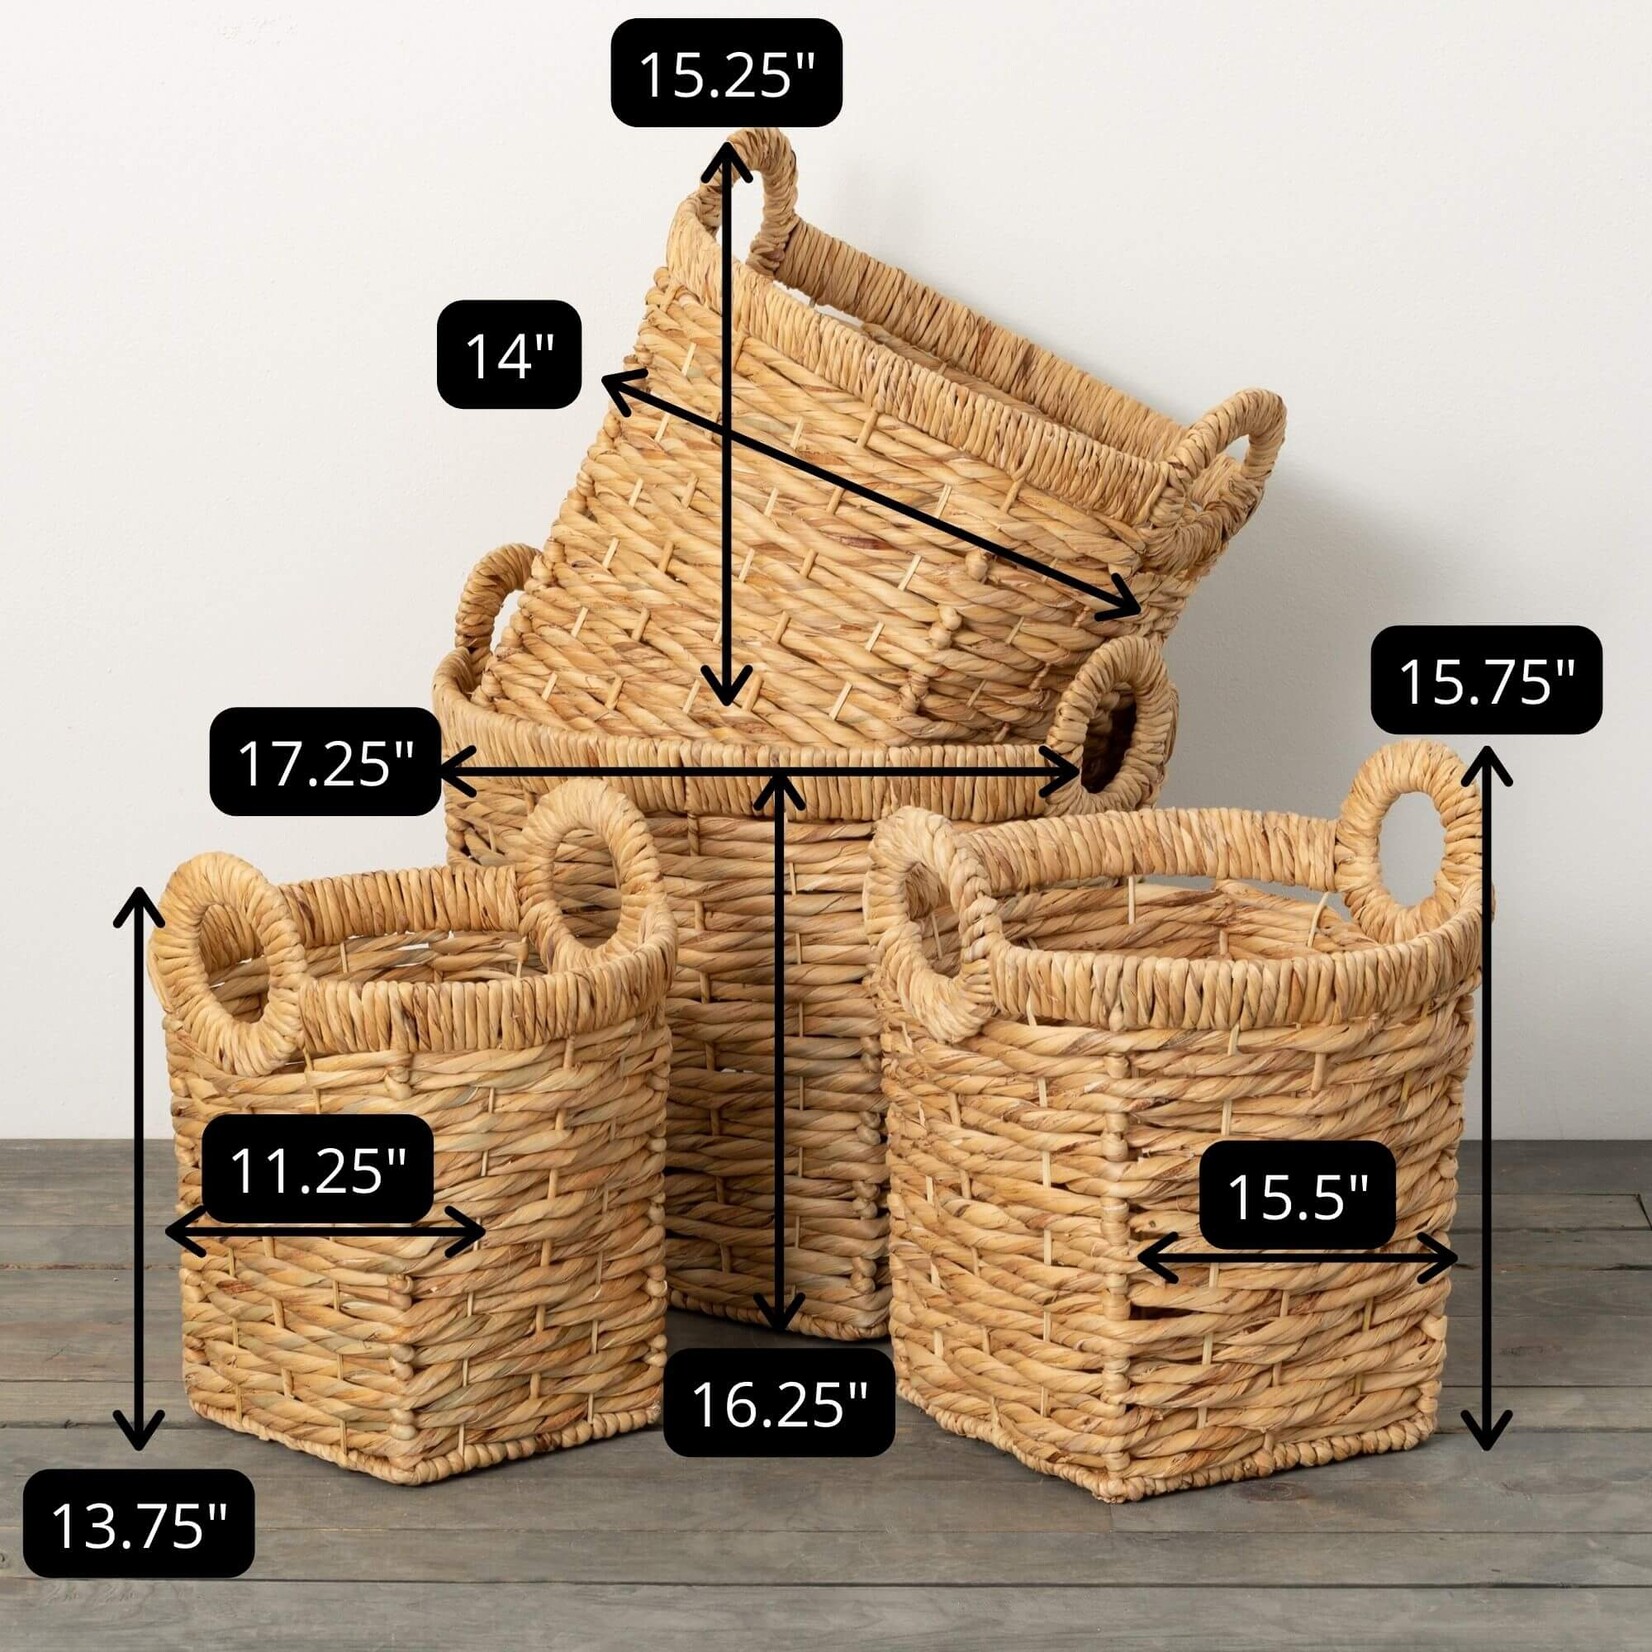 Natural Woven Basket With Handles, 15.75"